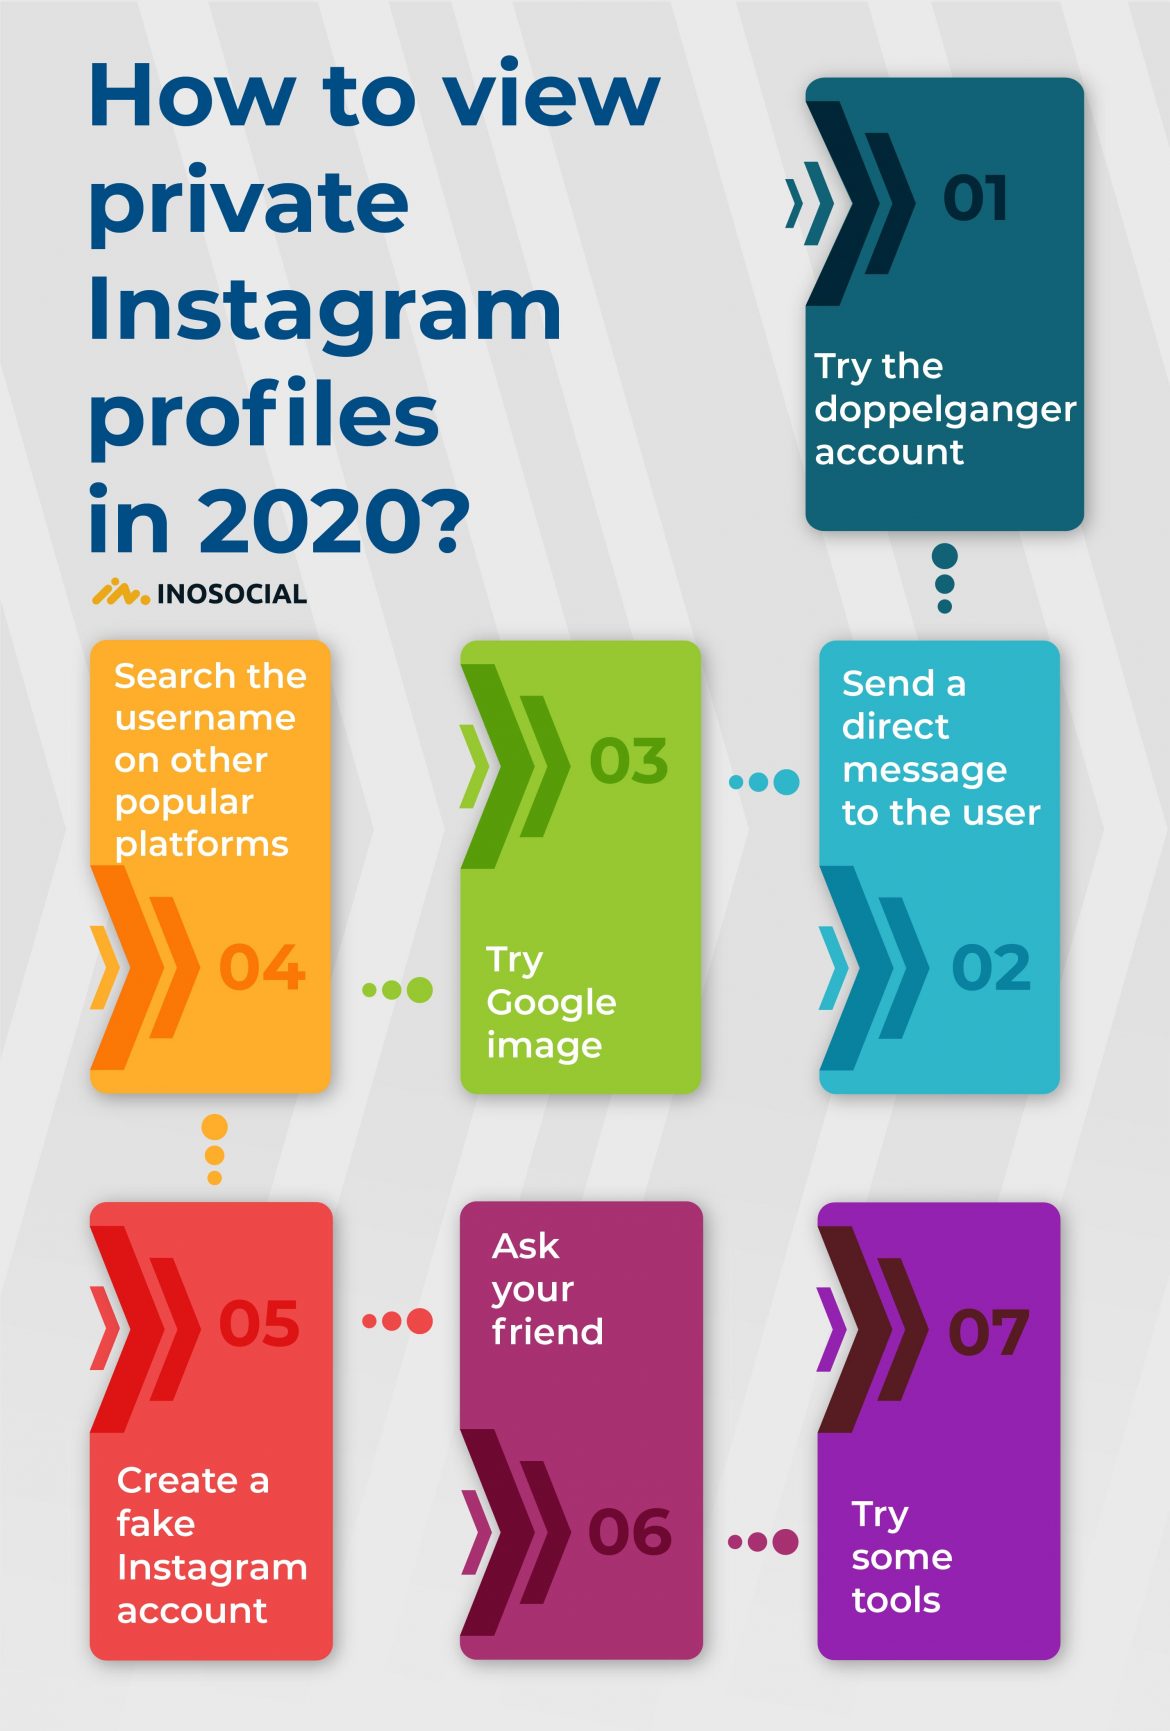 HOW TO VIEW PRIVATE INSTAGRAM PROFILES IN 2020? InoSocial